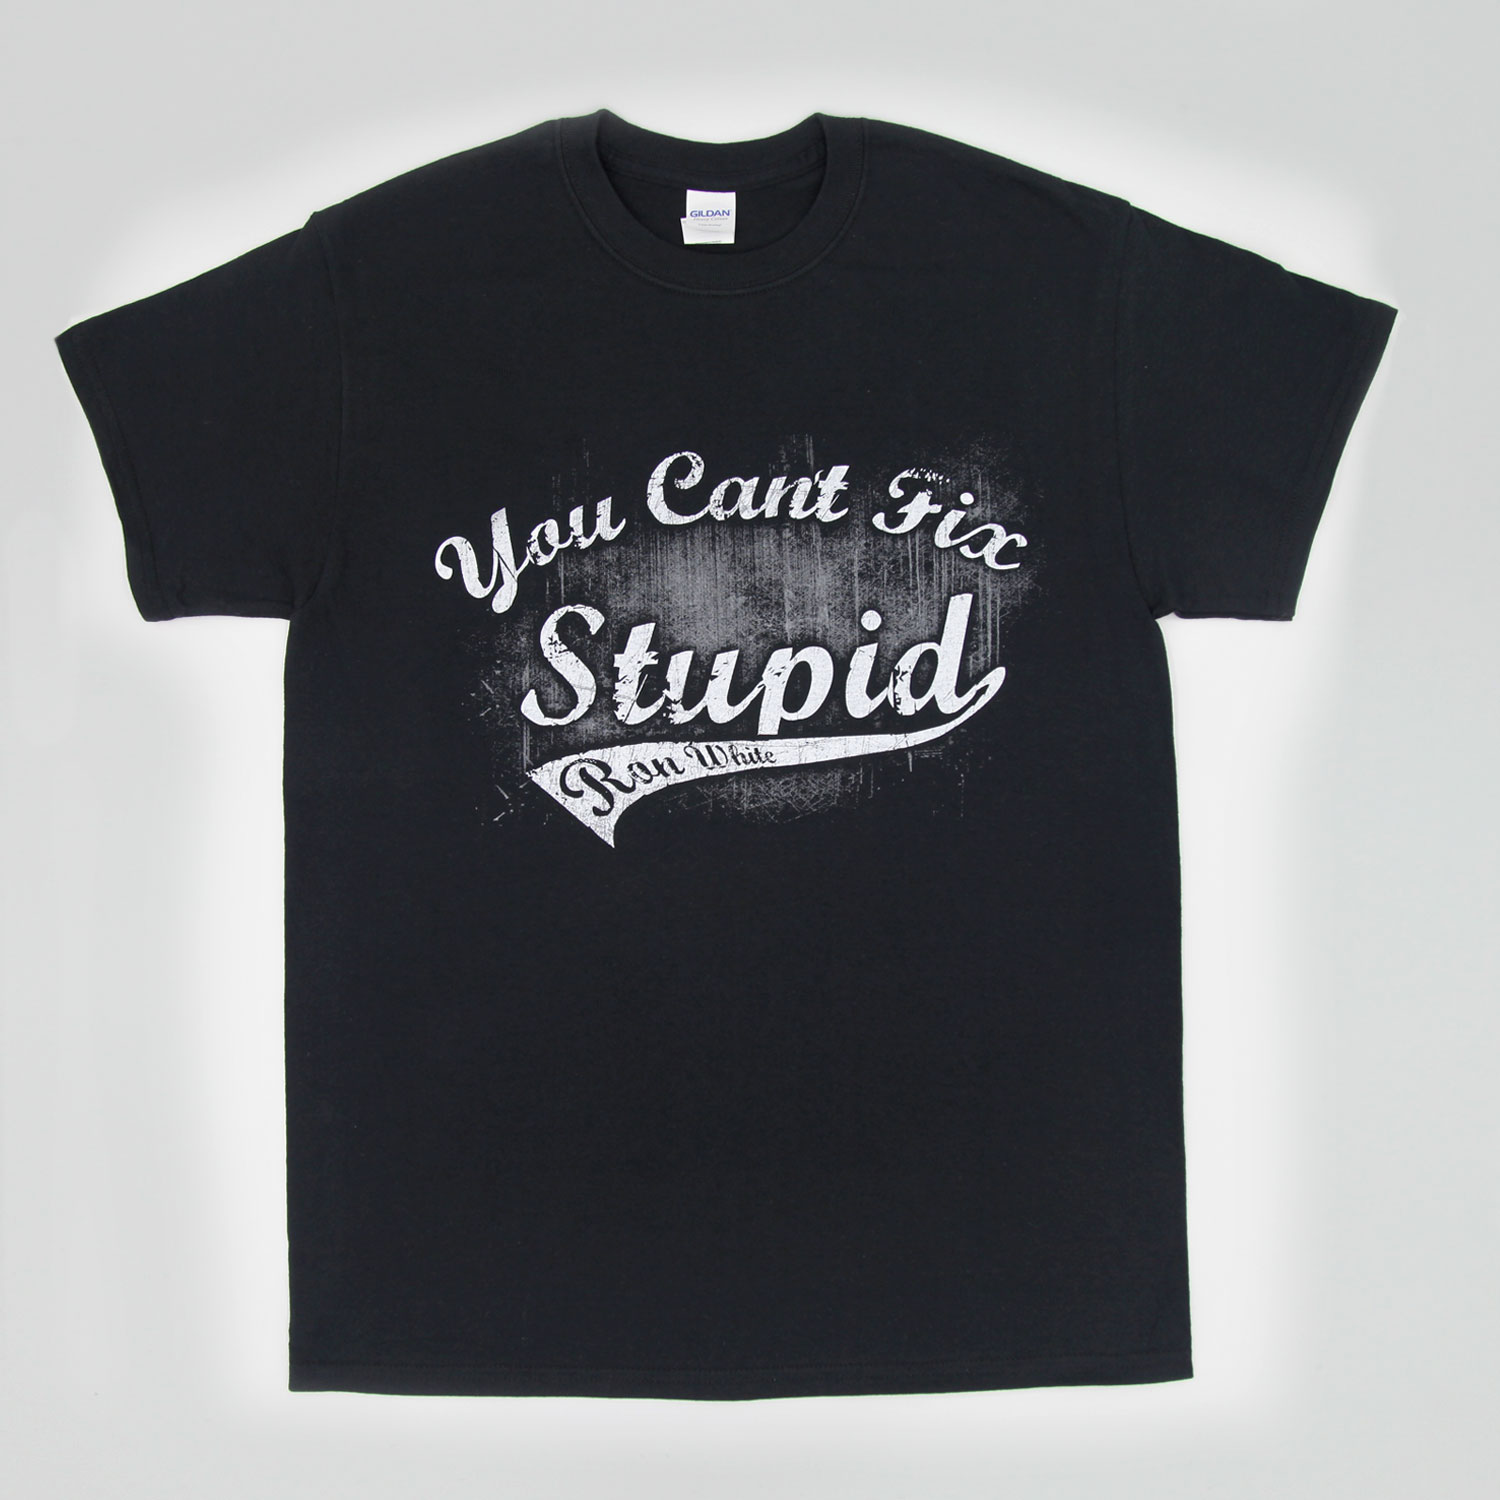 “YOU CAN’T FIX STUPID” T-SHIRT – Ron Store